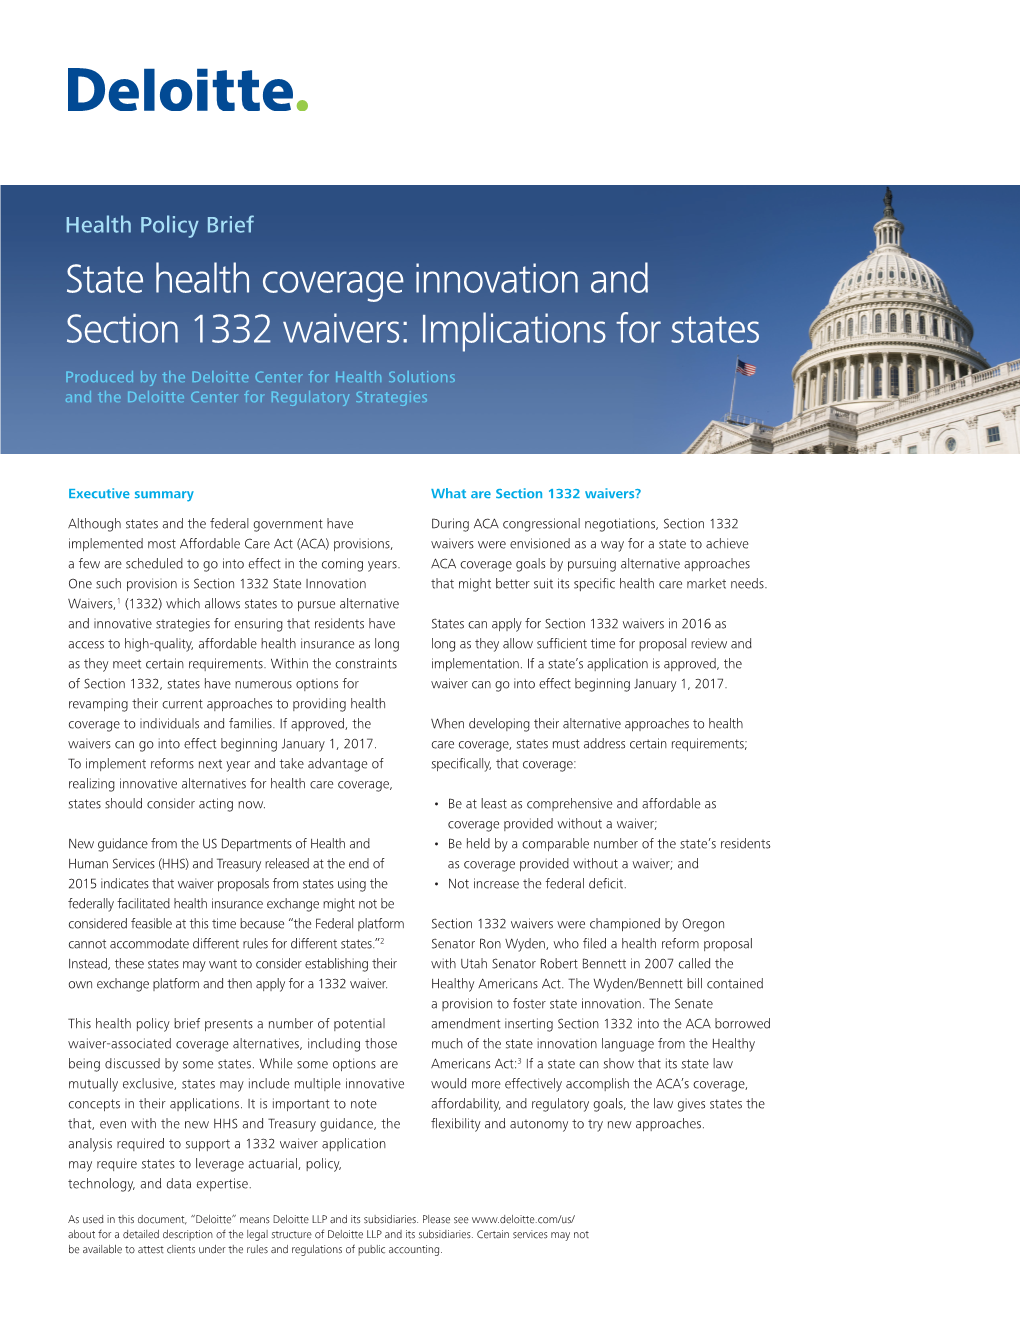 State Health Coverage Innovation and Section 1332 Waivers: Implications for States